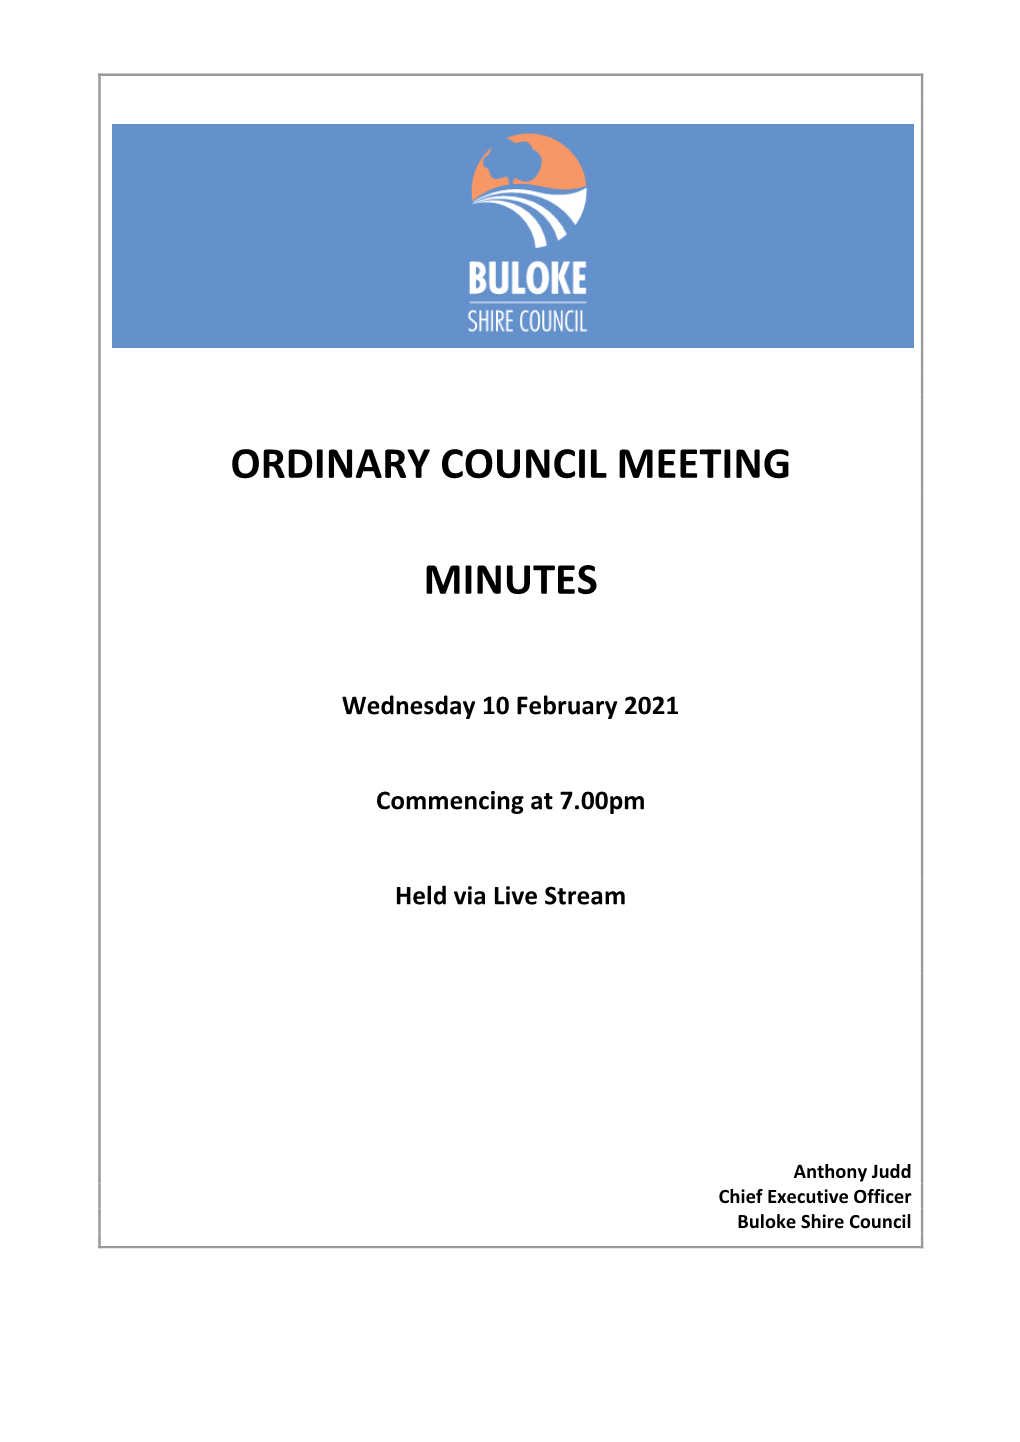 Minutes of Ordinary Meeting